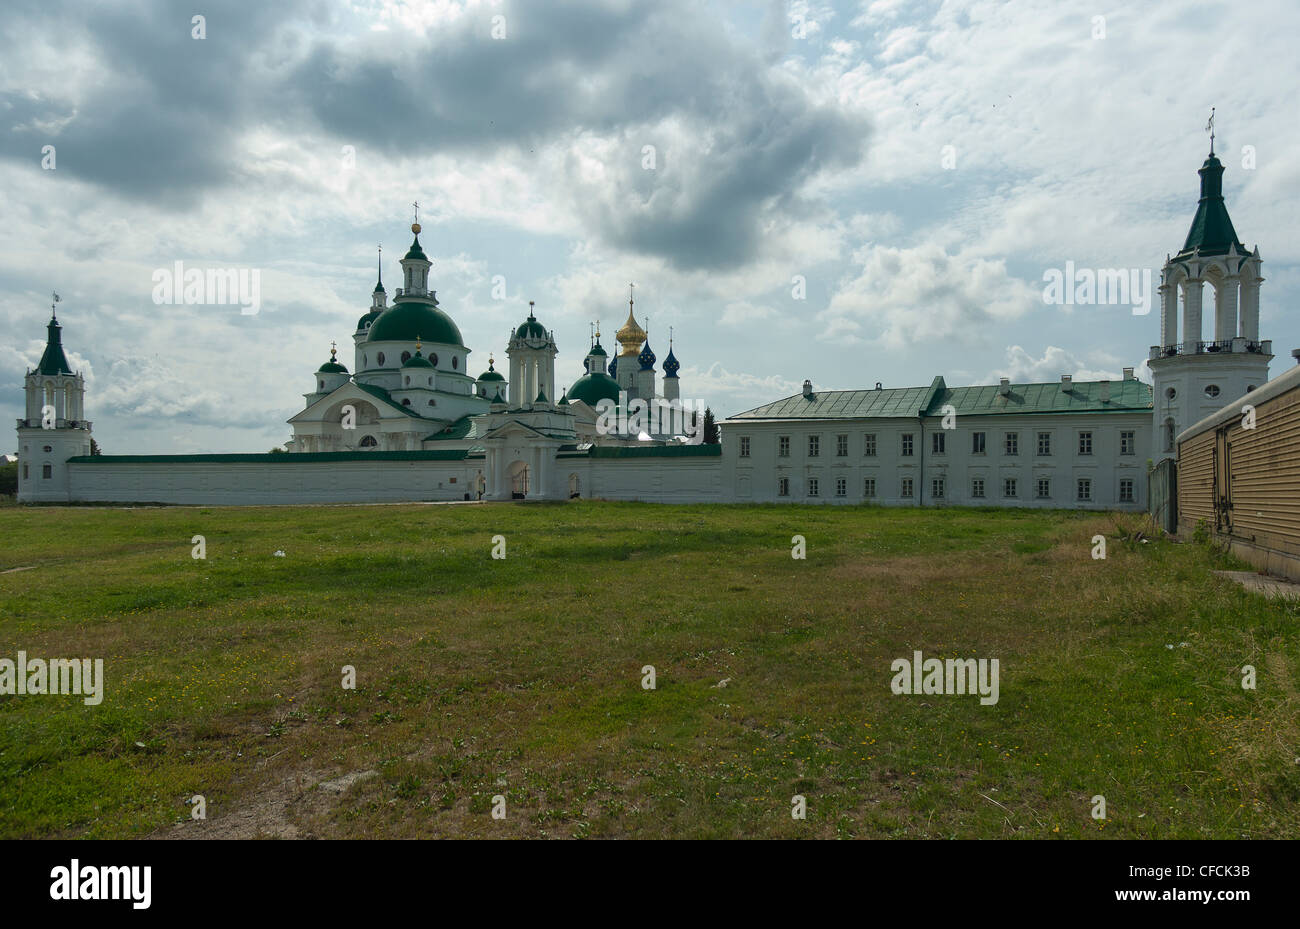 Spaso-Yakovlevsky Monastery situated to the left from the Rostov kremlin on the Rostov's outskirts Stock Photo